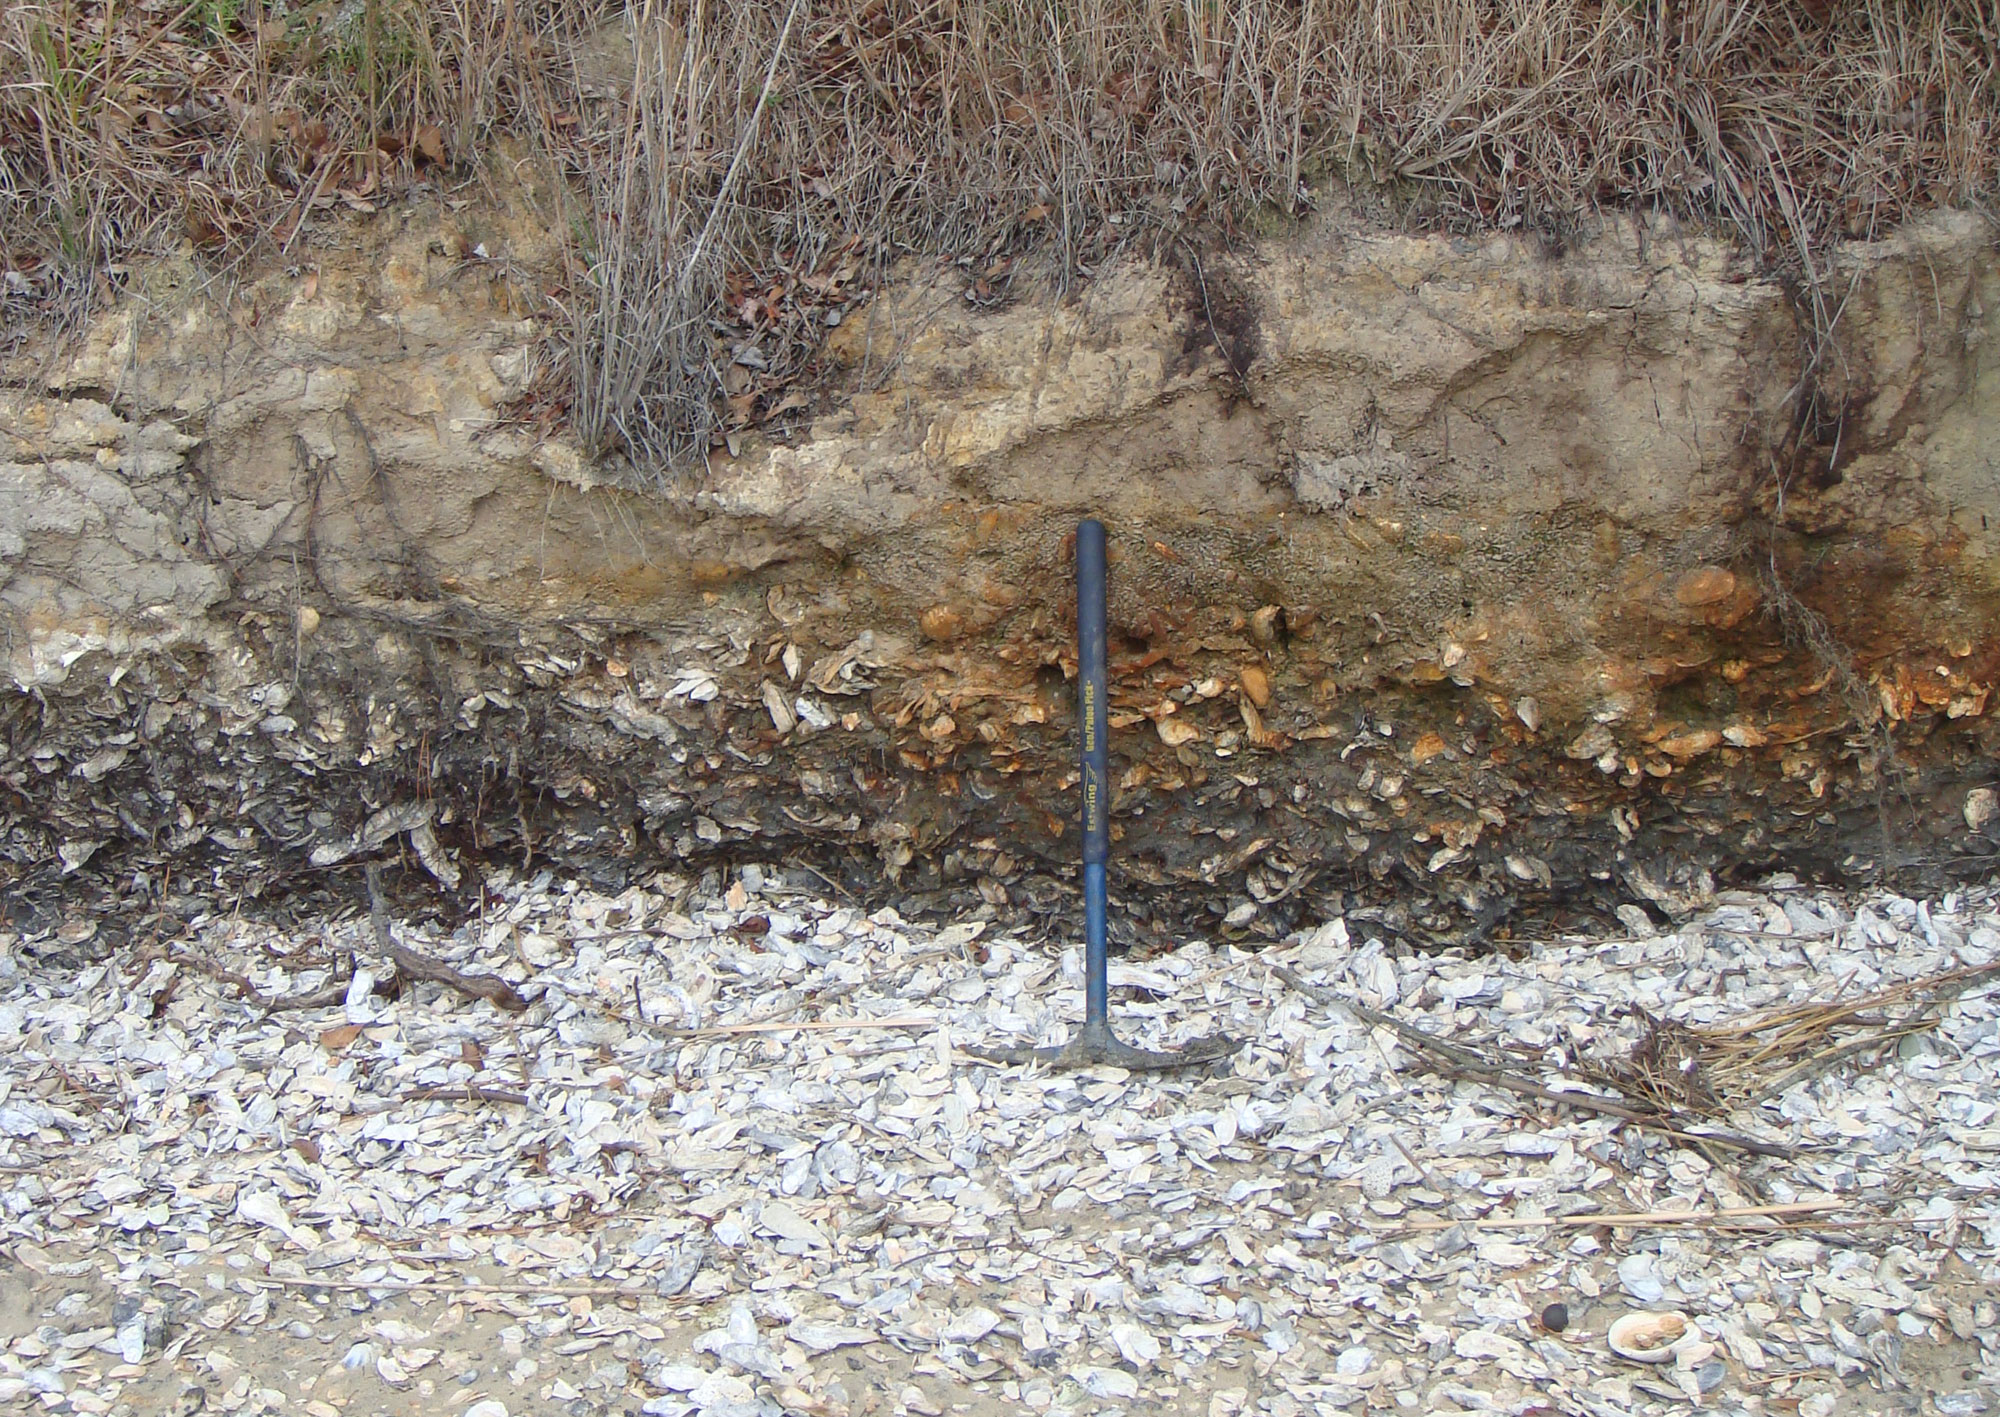 Photo of a Pleistocene oyster reef in South Carolina. The figure shows many oyster shells embedded in sediment as well as littering the foreground. The image has a pick for scale.